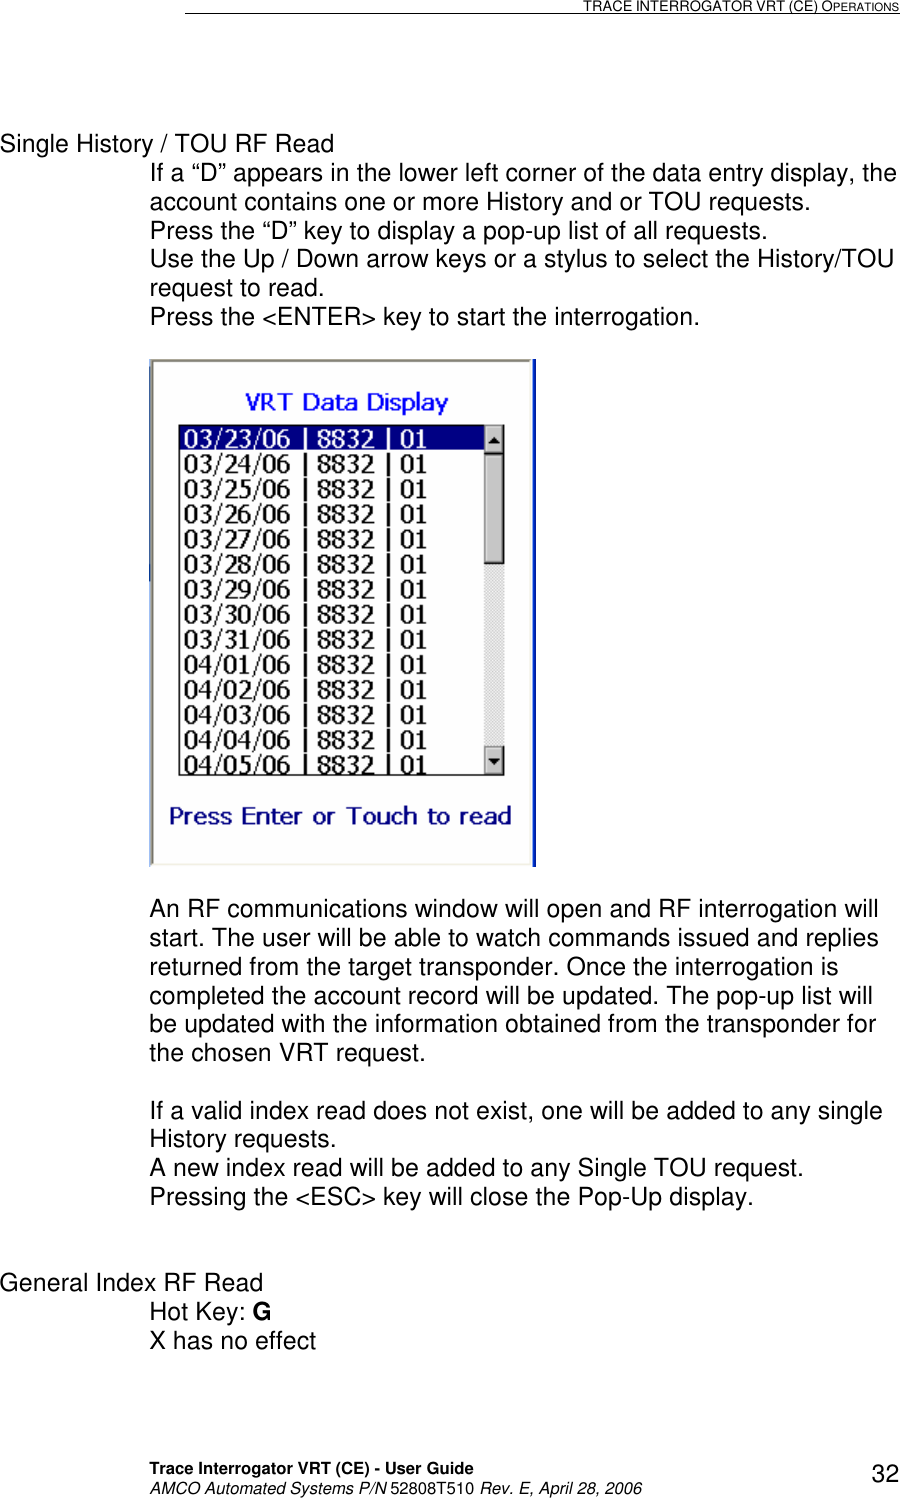                                                                                                                              TRACE INTERROGATOR VRT (CE) OPERATIONS    Trace Interrogator VRT (CE) - User Guide   AMCO Automated Systems P/N 52808T510 Rev. E, April 28, 2006 32 Single History / TOU RF Read If a “D” appears in the lower left corner of the data entry display, the account contains one or more History and or TOU requests.  Press the “D” key to display a pop-up list of all requests. Use the Up / Down arrow keys or a stylus to select the History/TOU request to read. Press the &lt;ENTER&gt; key to start the interrogation.    An RF communications window will open and RF interrogation will start. The user will be able to watch commands issued and replies returned from the target transponder. Once the interrogation is completed the account record will be updated. The pop-up list will be updated with the information obtained from the transponder for the chosen VRT request.  If a valid index read does not exist, one will be added to any single History requests. A new index read will be added to any Single TOU request. Pressing the &lt;ESC&gt; key will close the Pop-Up display.   General Index RF Read Hot Key: G   X has no effect  